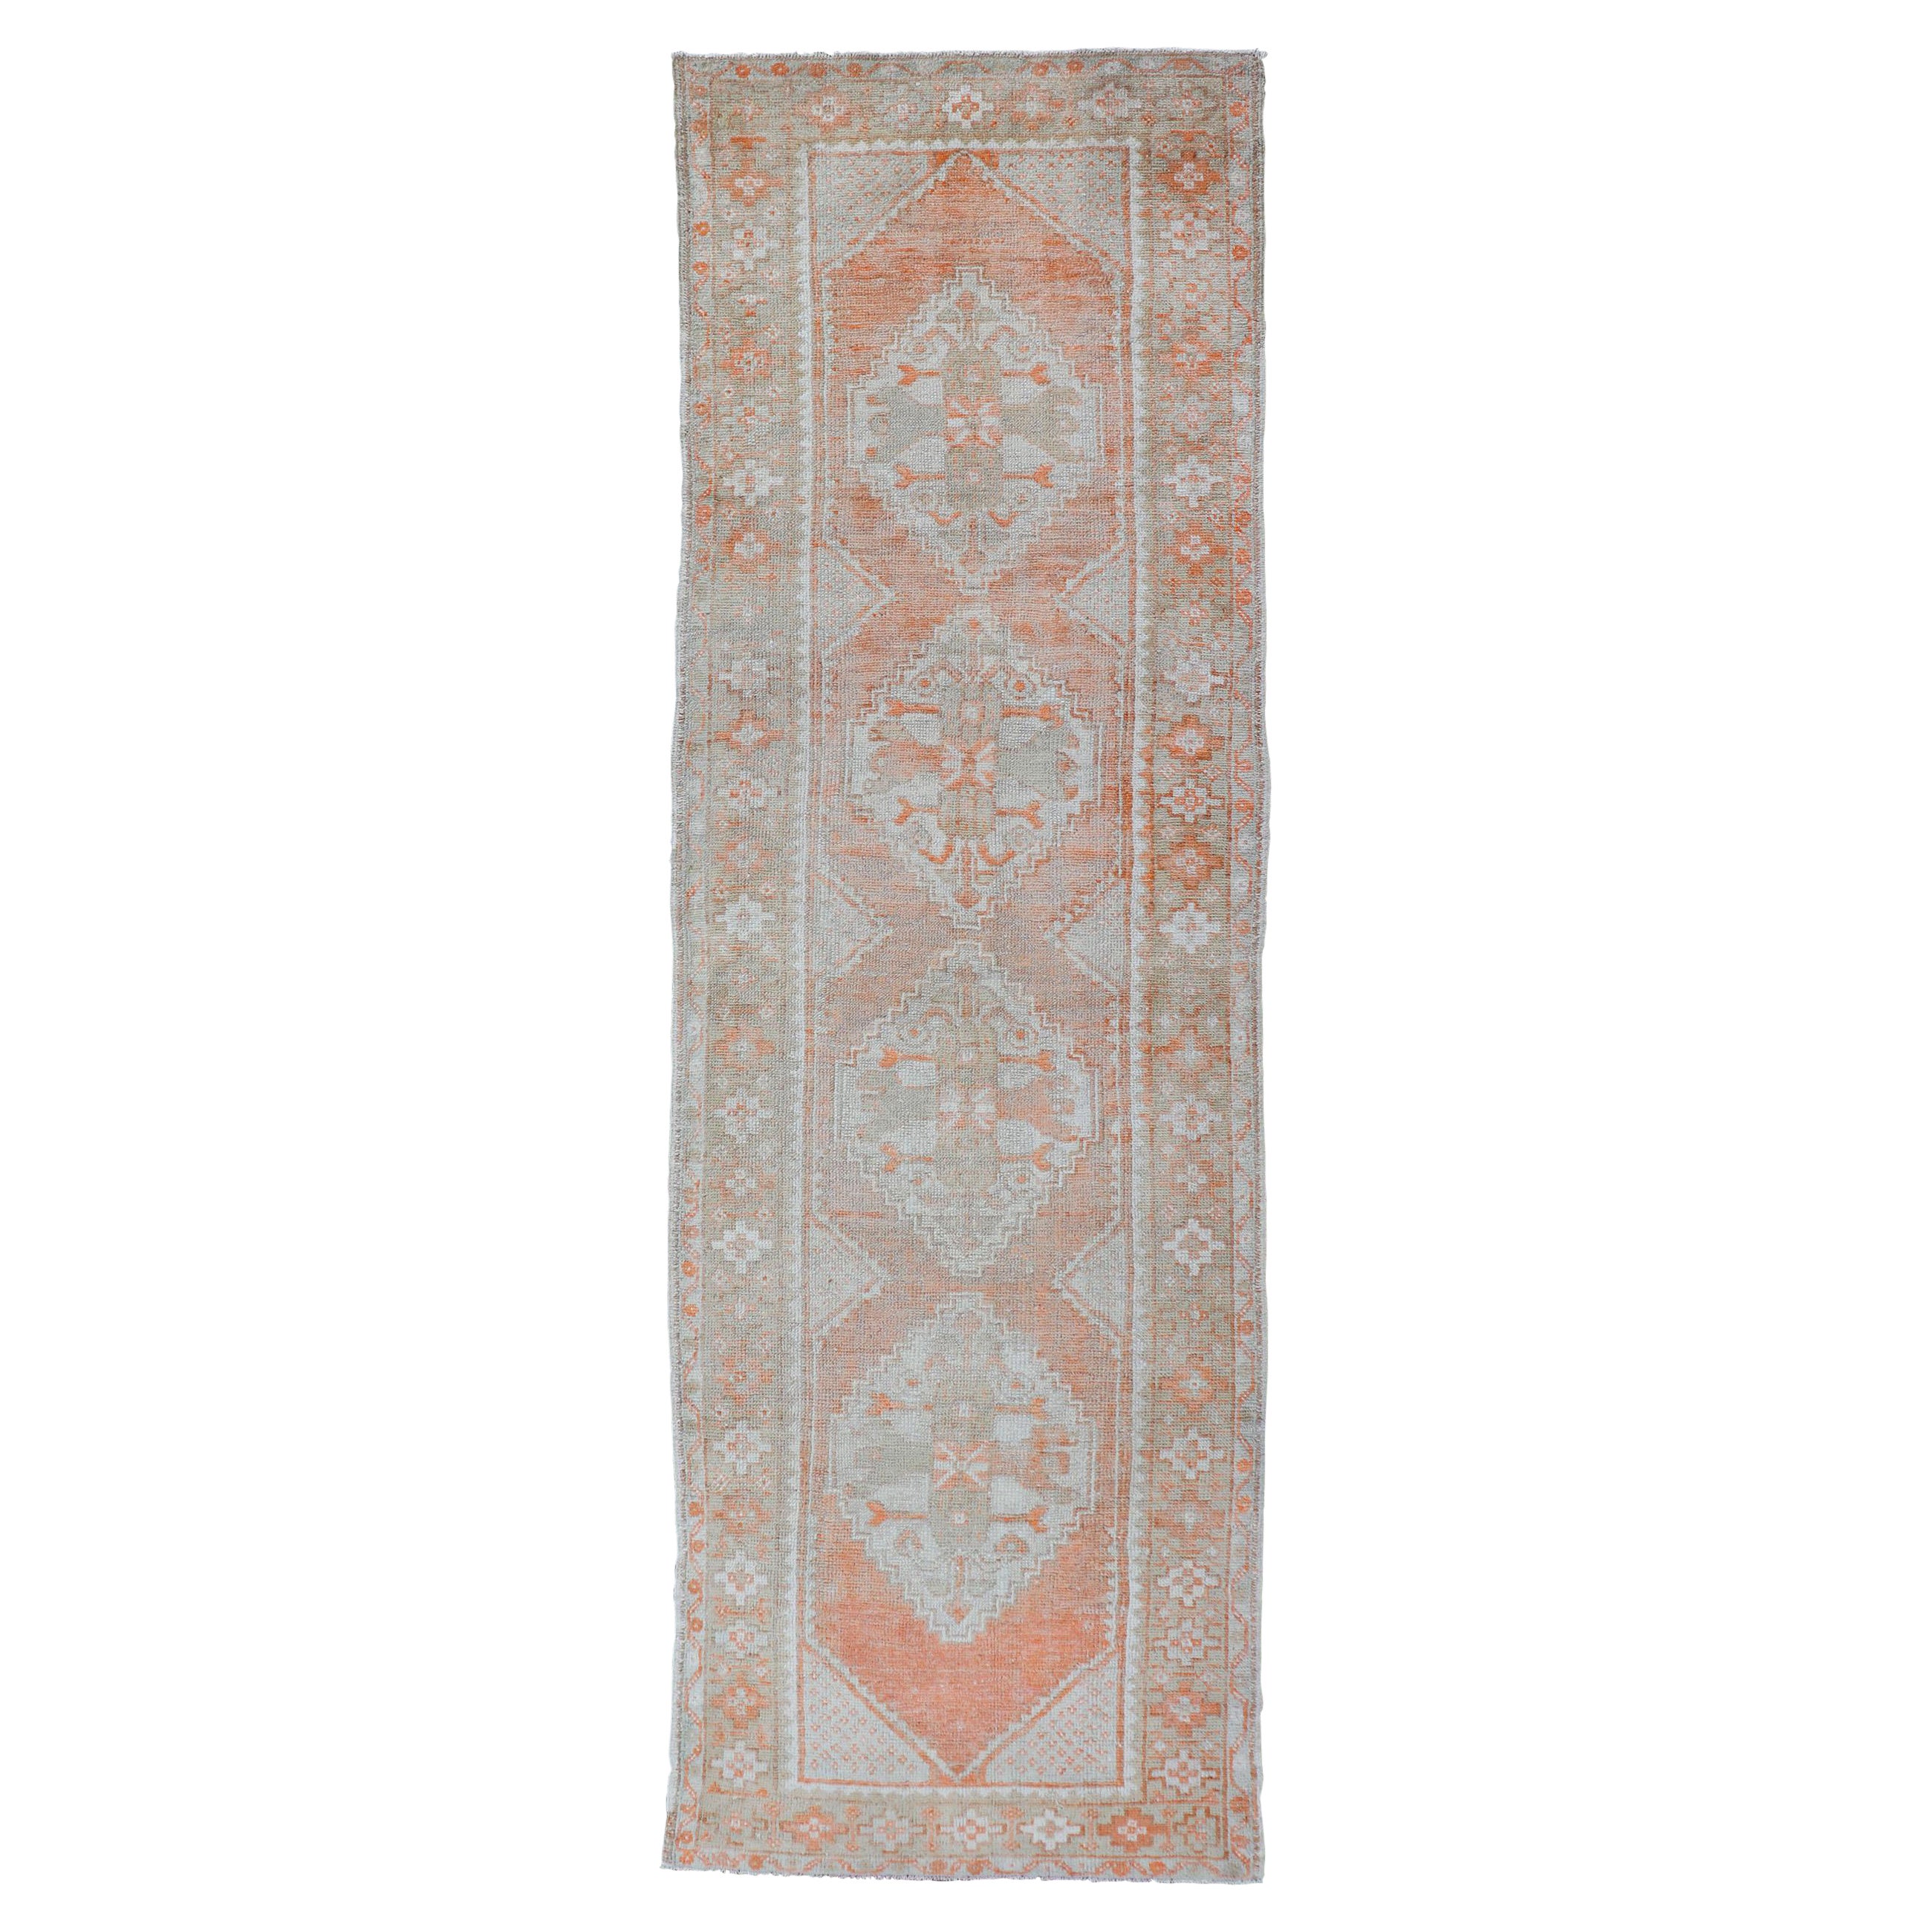 Antique Turkish Oushak Runner with Diamond Medallions and Floral Motifs